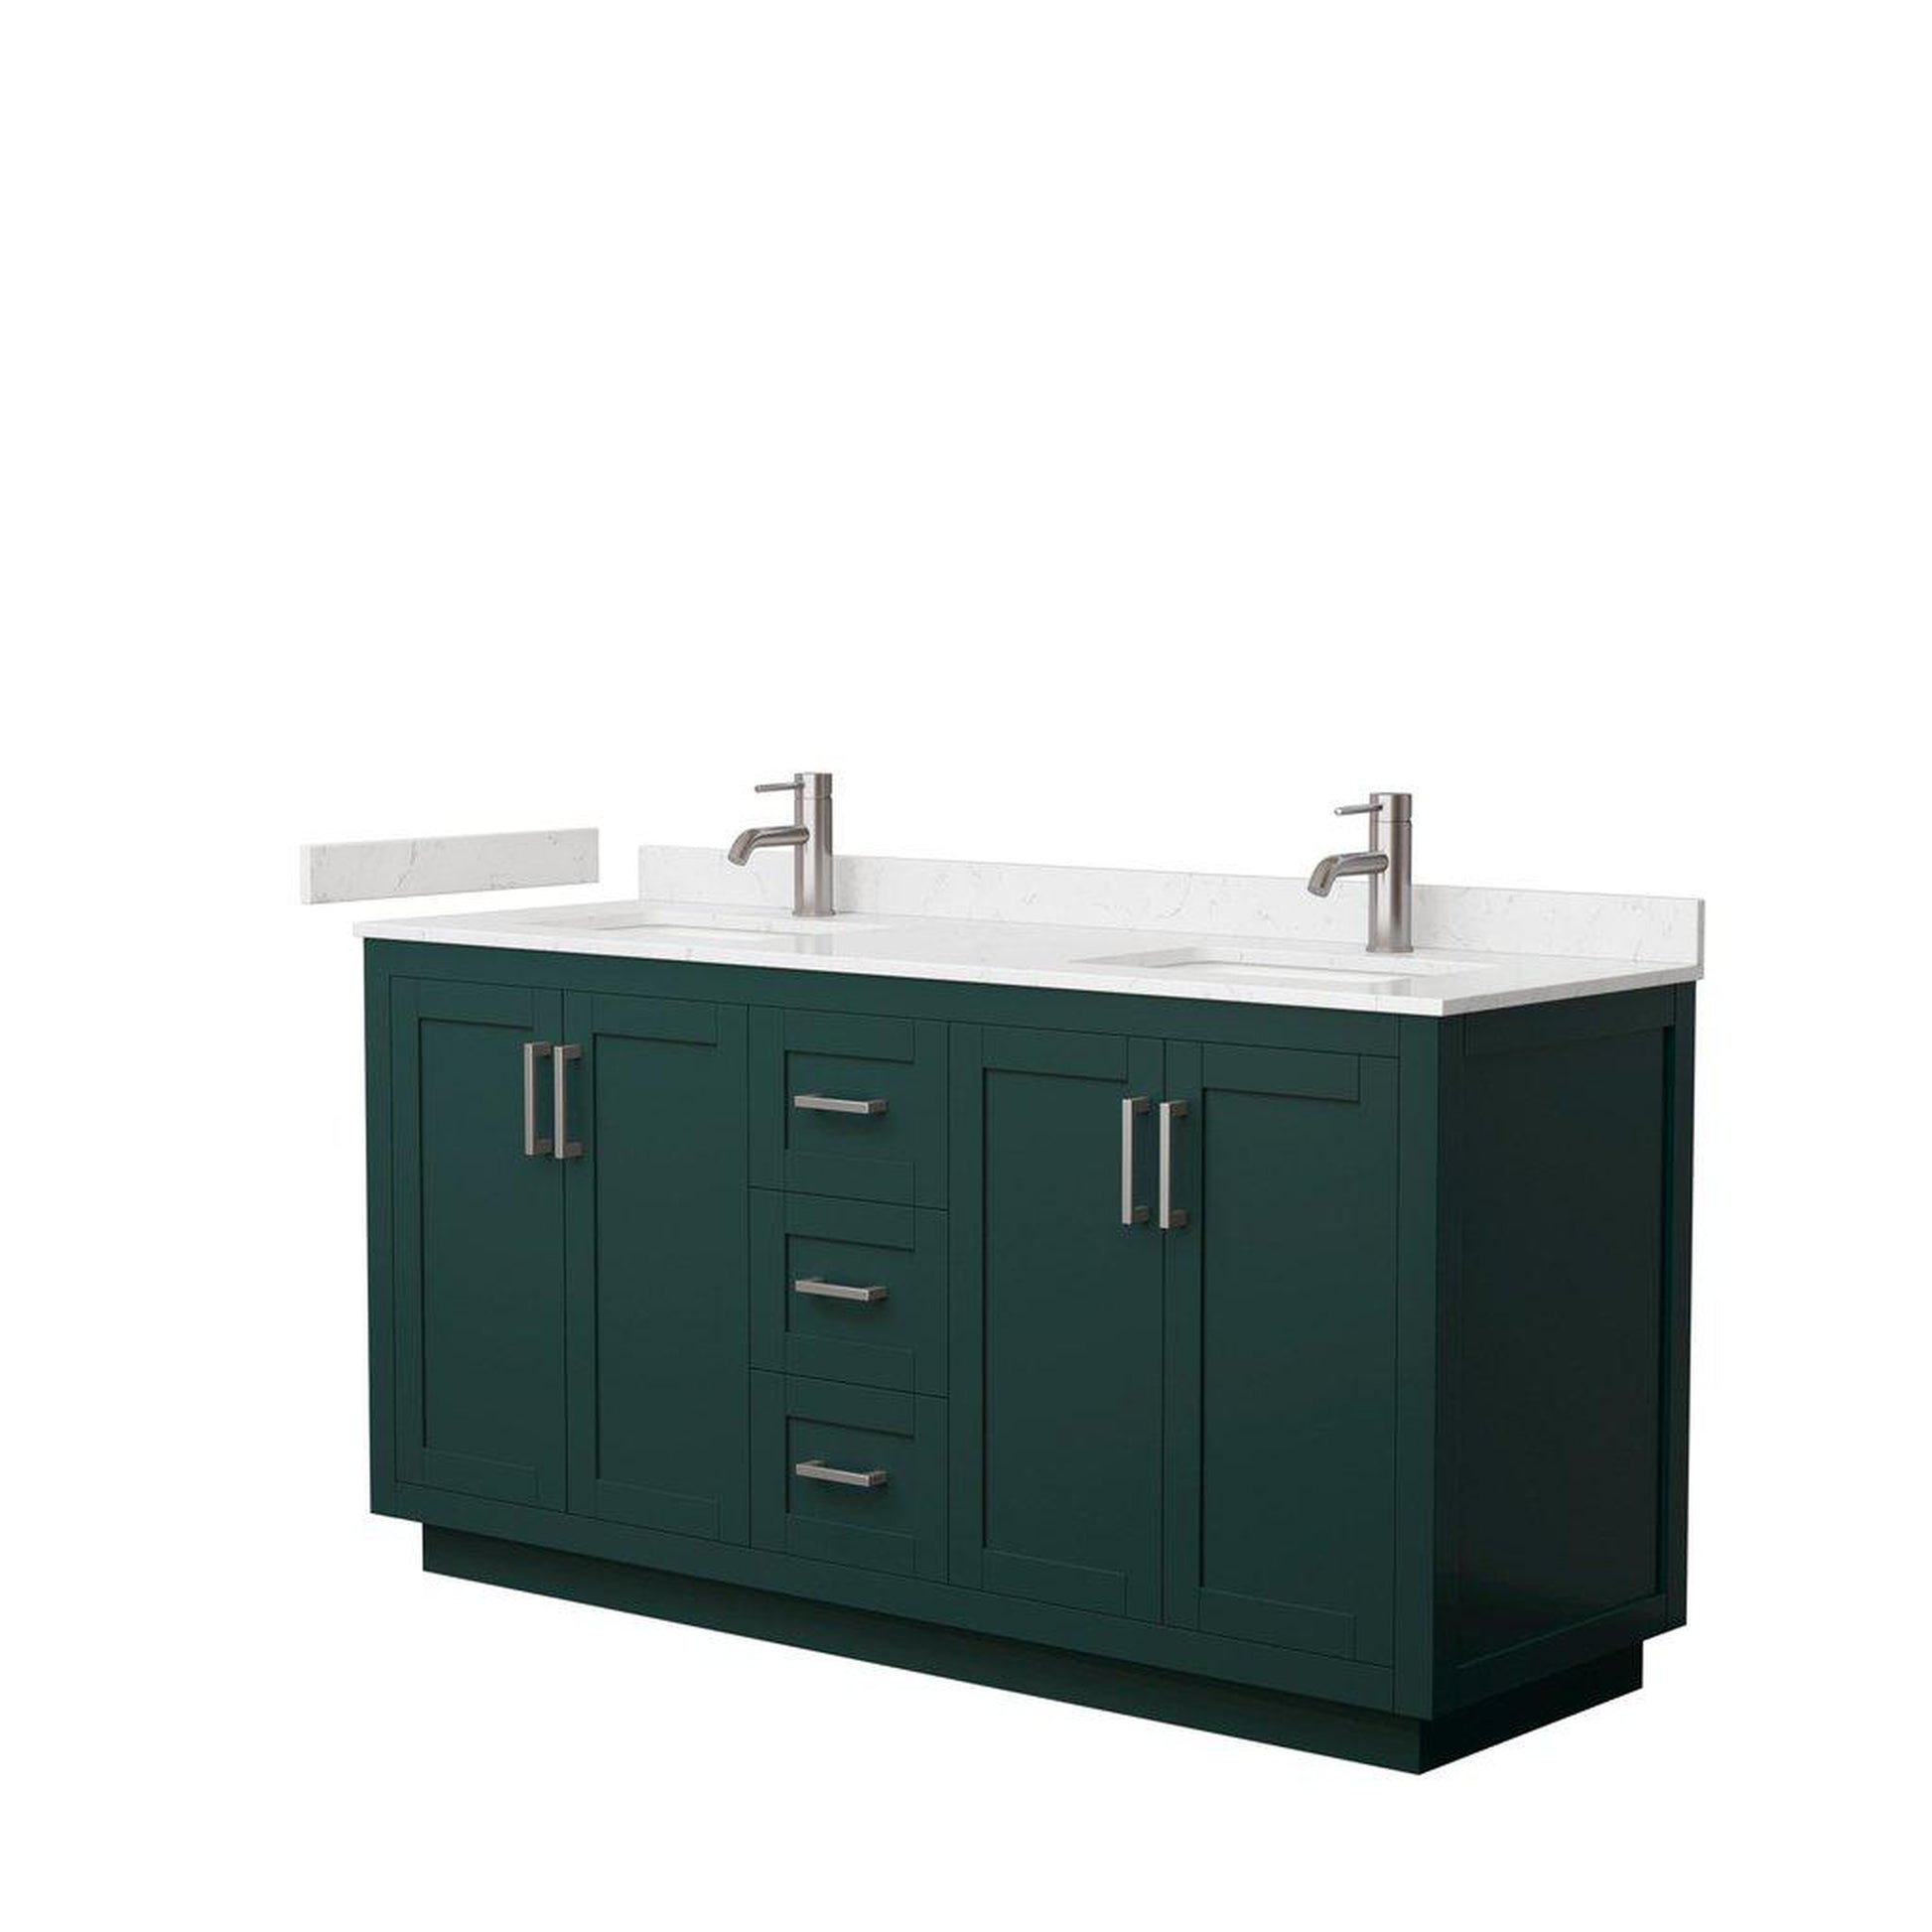 Wyndham Collection Miranda 66" Double Bathroom Green Vanity Set With Light-Vein Carrara Cultured Marble Countertop, Undermount Square Sink, And Brushed Nickel Trim